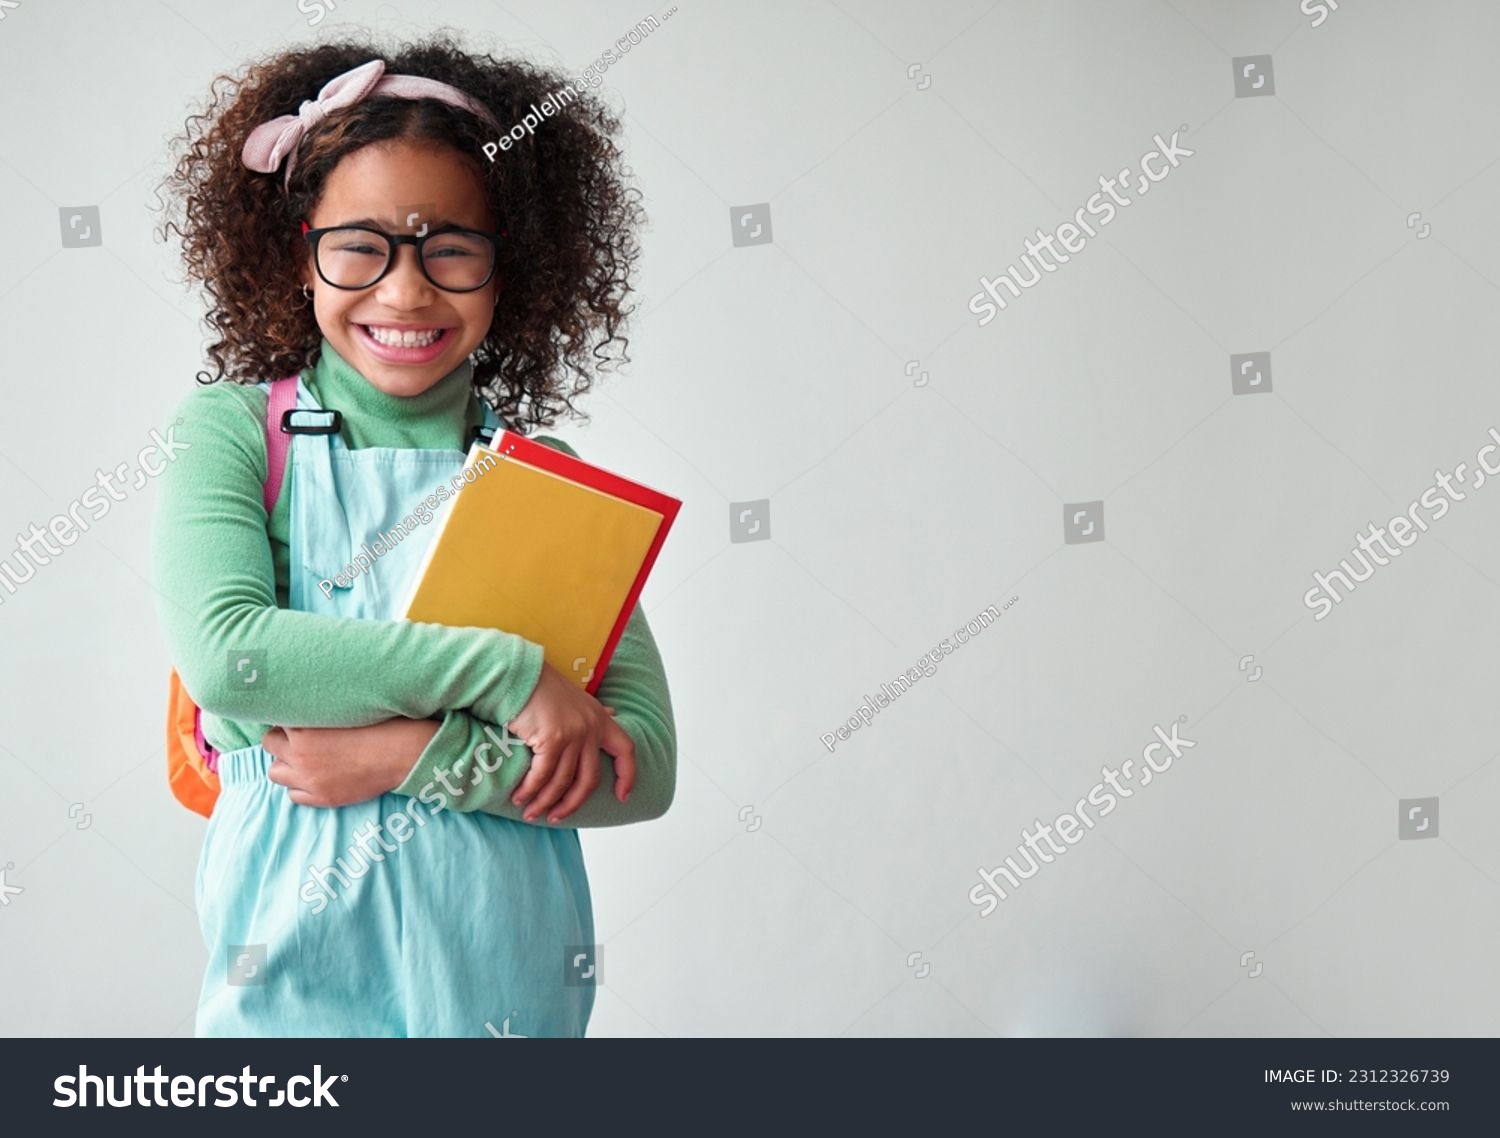 School, portrait of child student with books for knowledge, education and studying in a studio. Happy, smile and young smart girl kid with glasses for reading by a white background with mockup space. #2312326739